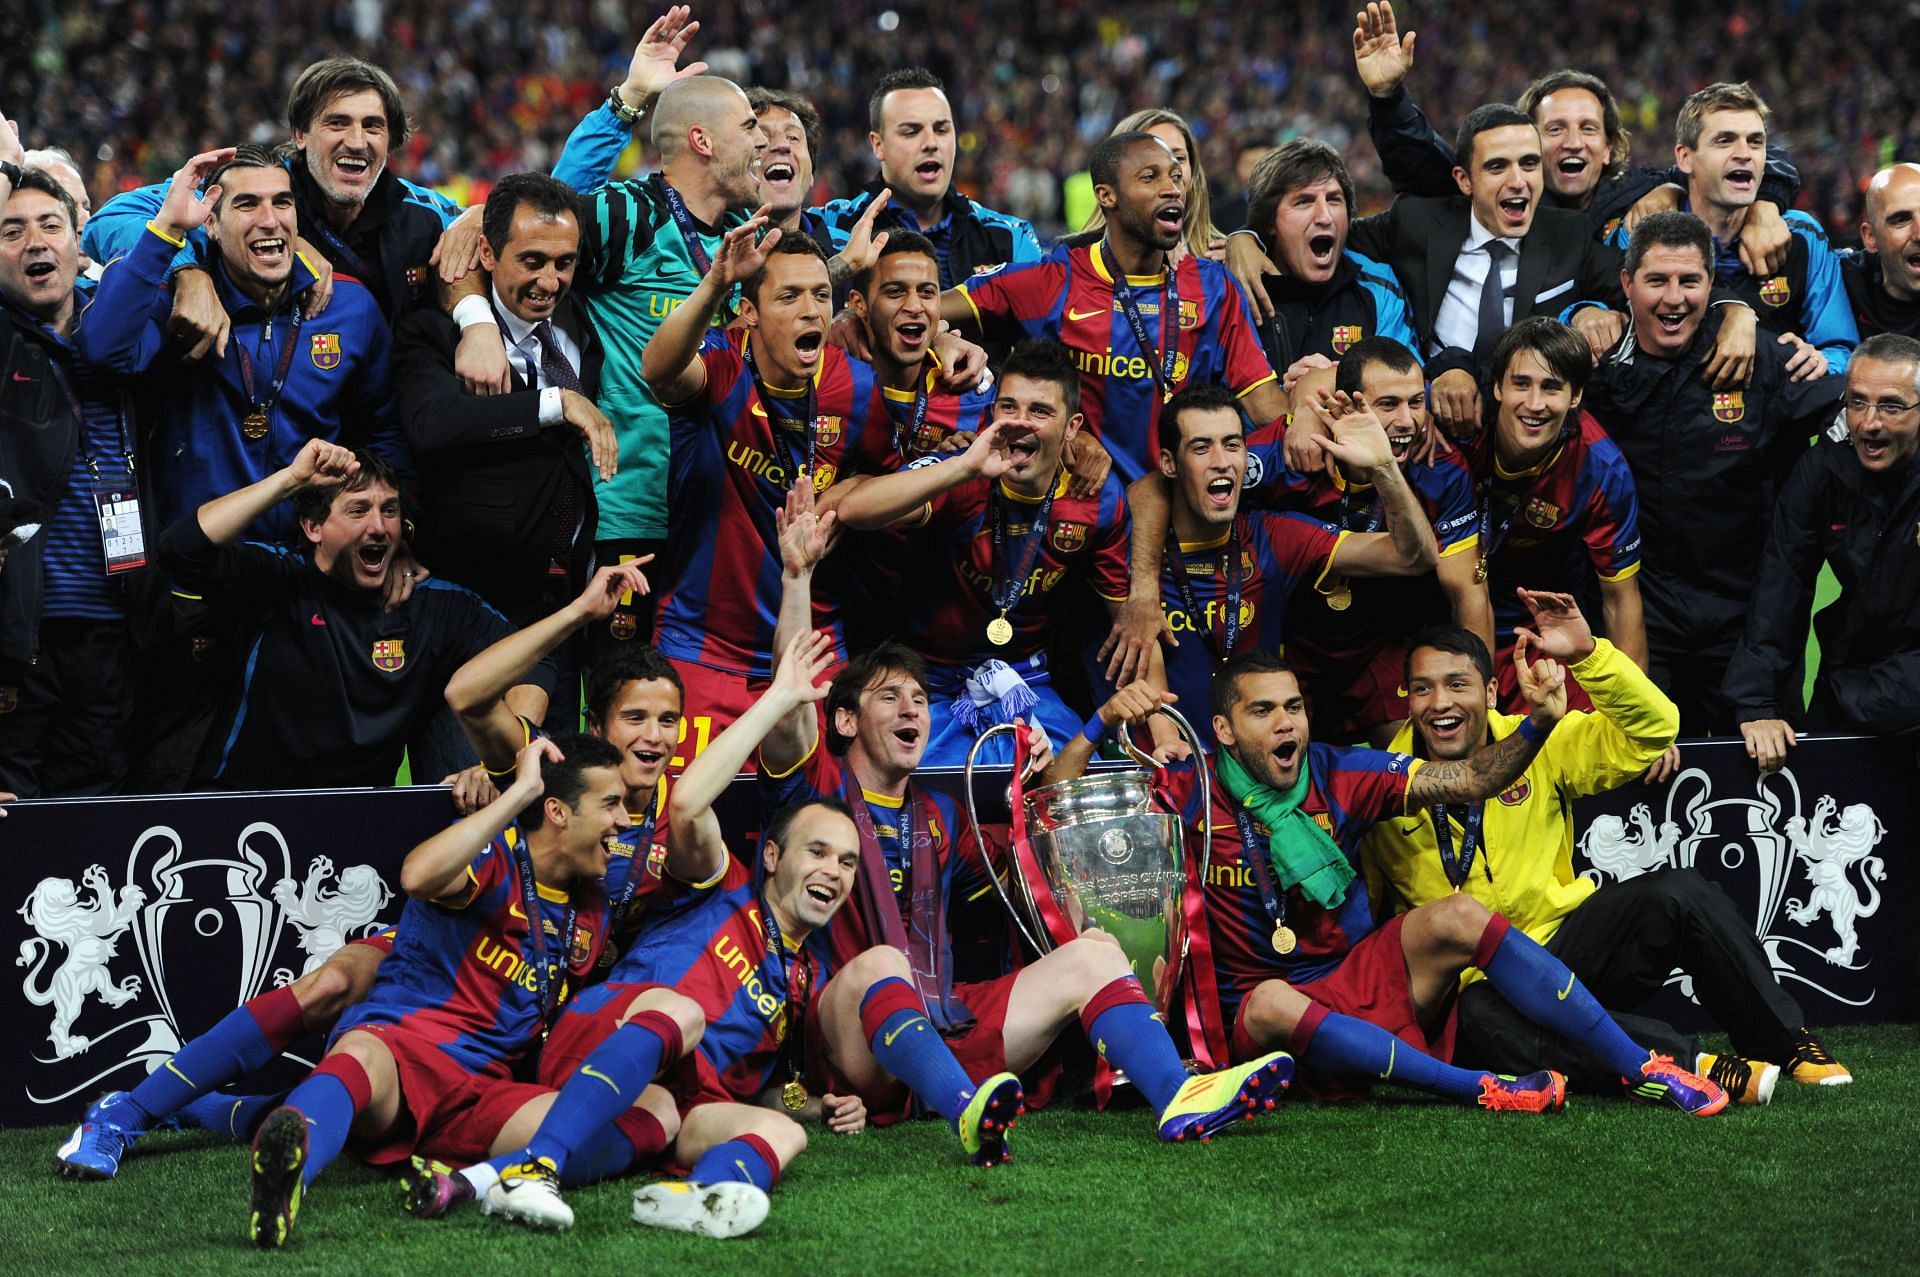 Barcelona dominated Europe during the 2000s-2010s.